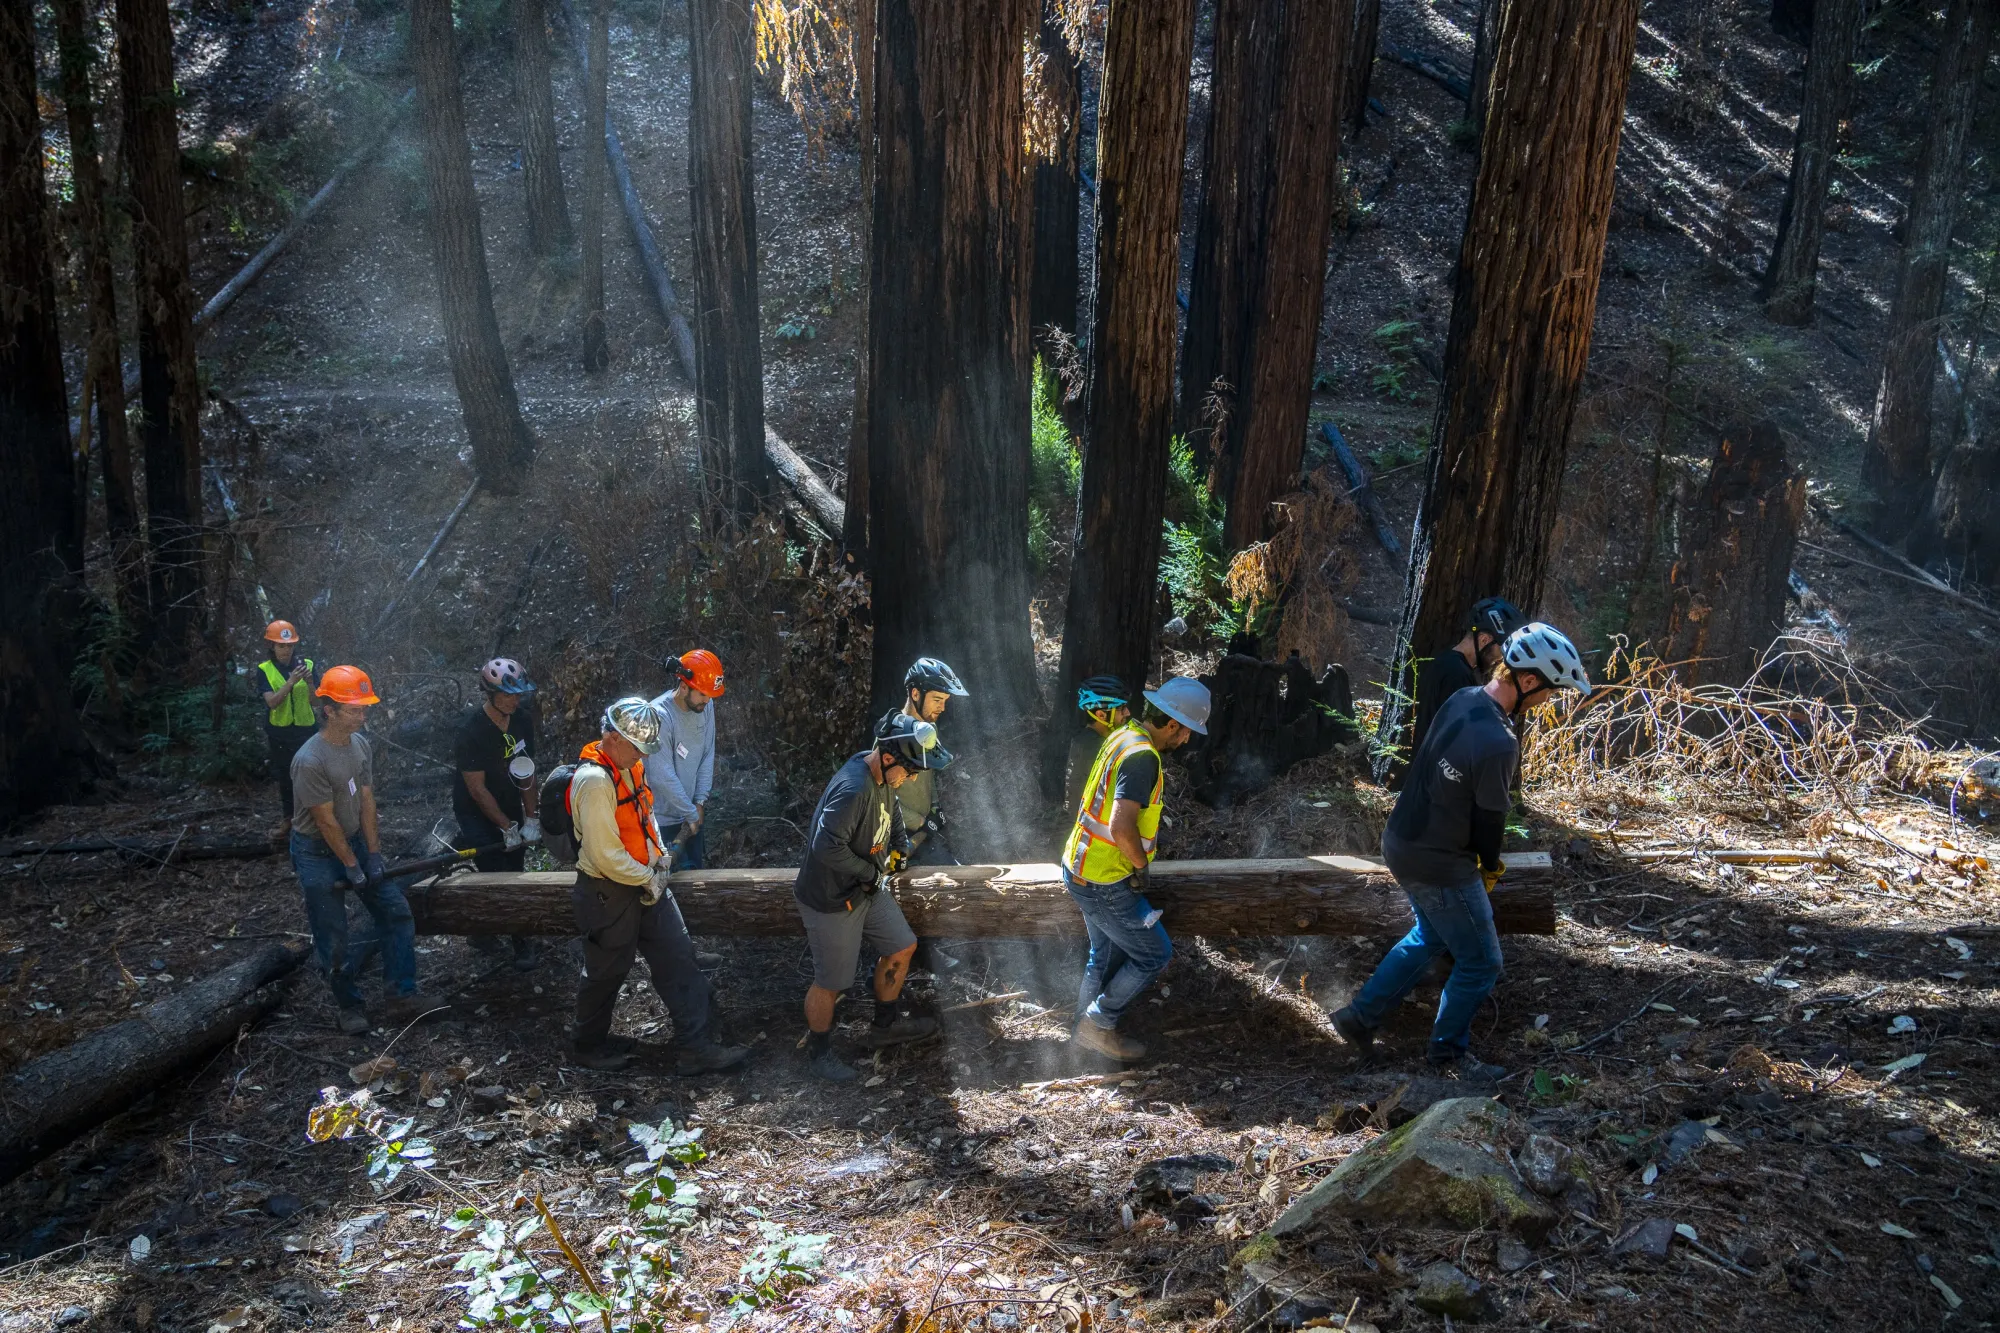 A group of individuals carrying a large piece of lumber through the forest